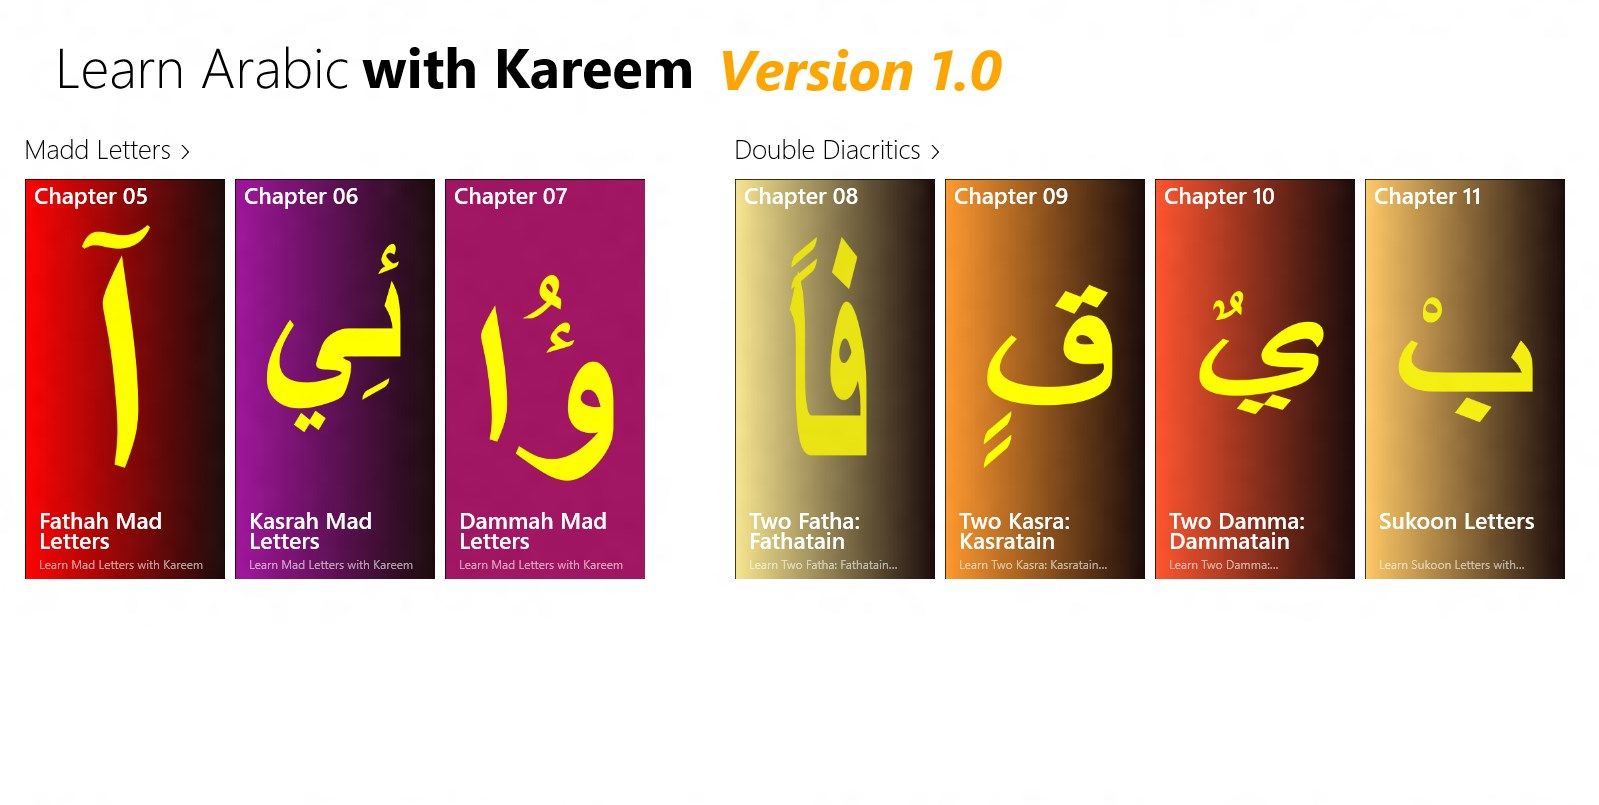 Learn Arabic using a series of chapter lessons. Each chapter contains 4 to 24 lessons.